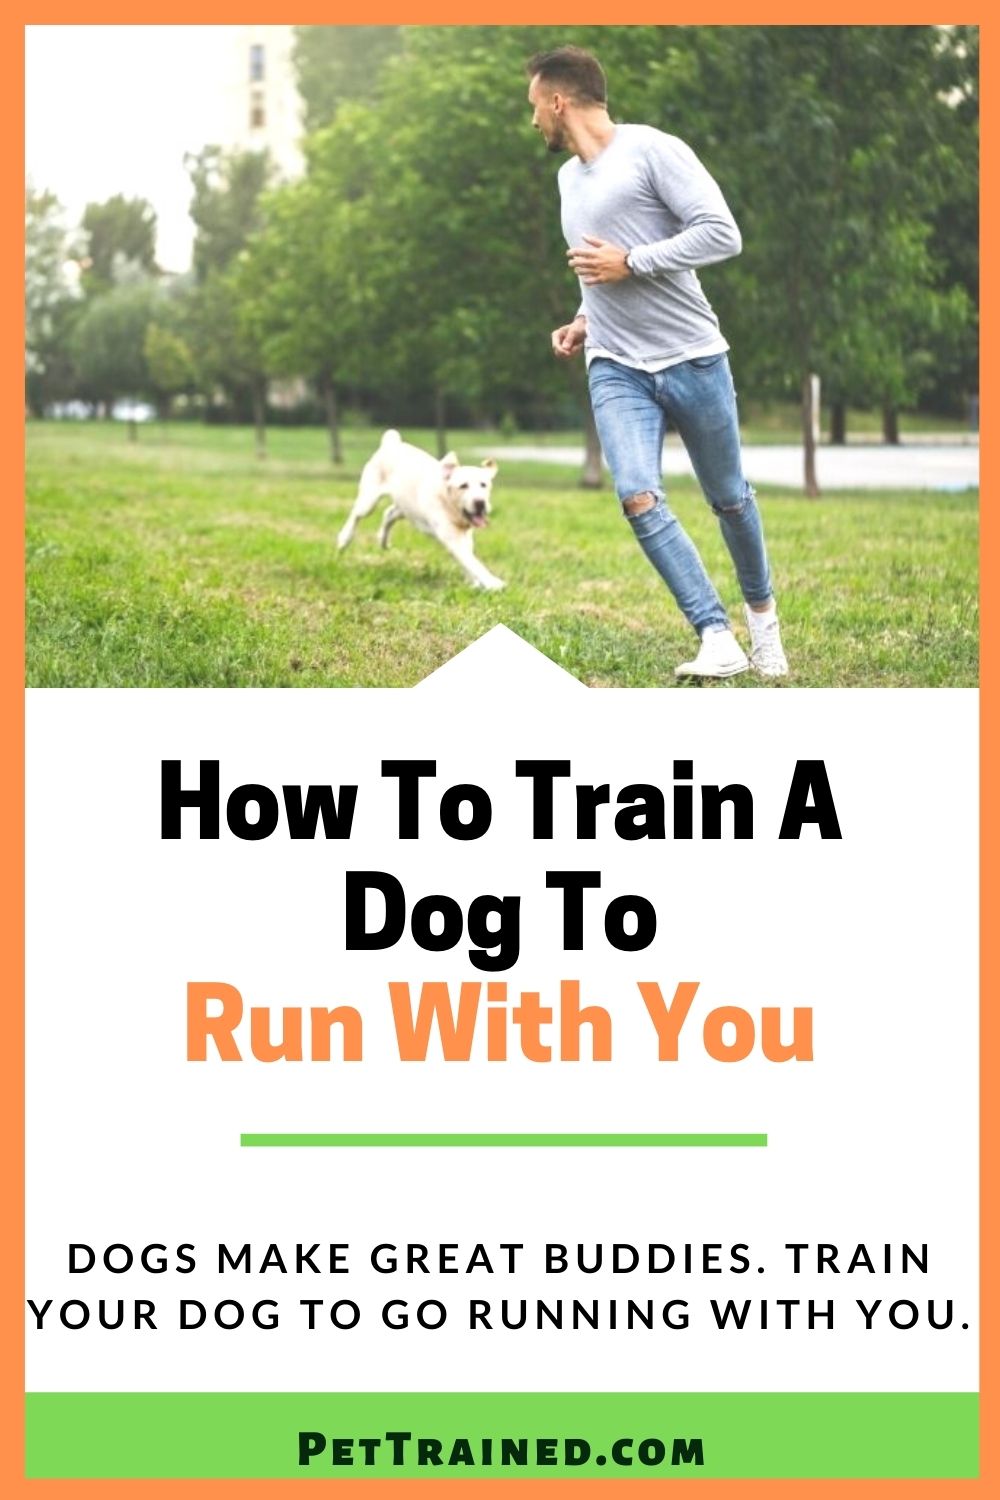 How to exercise your dog by running